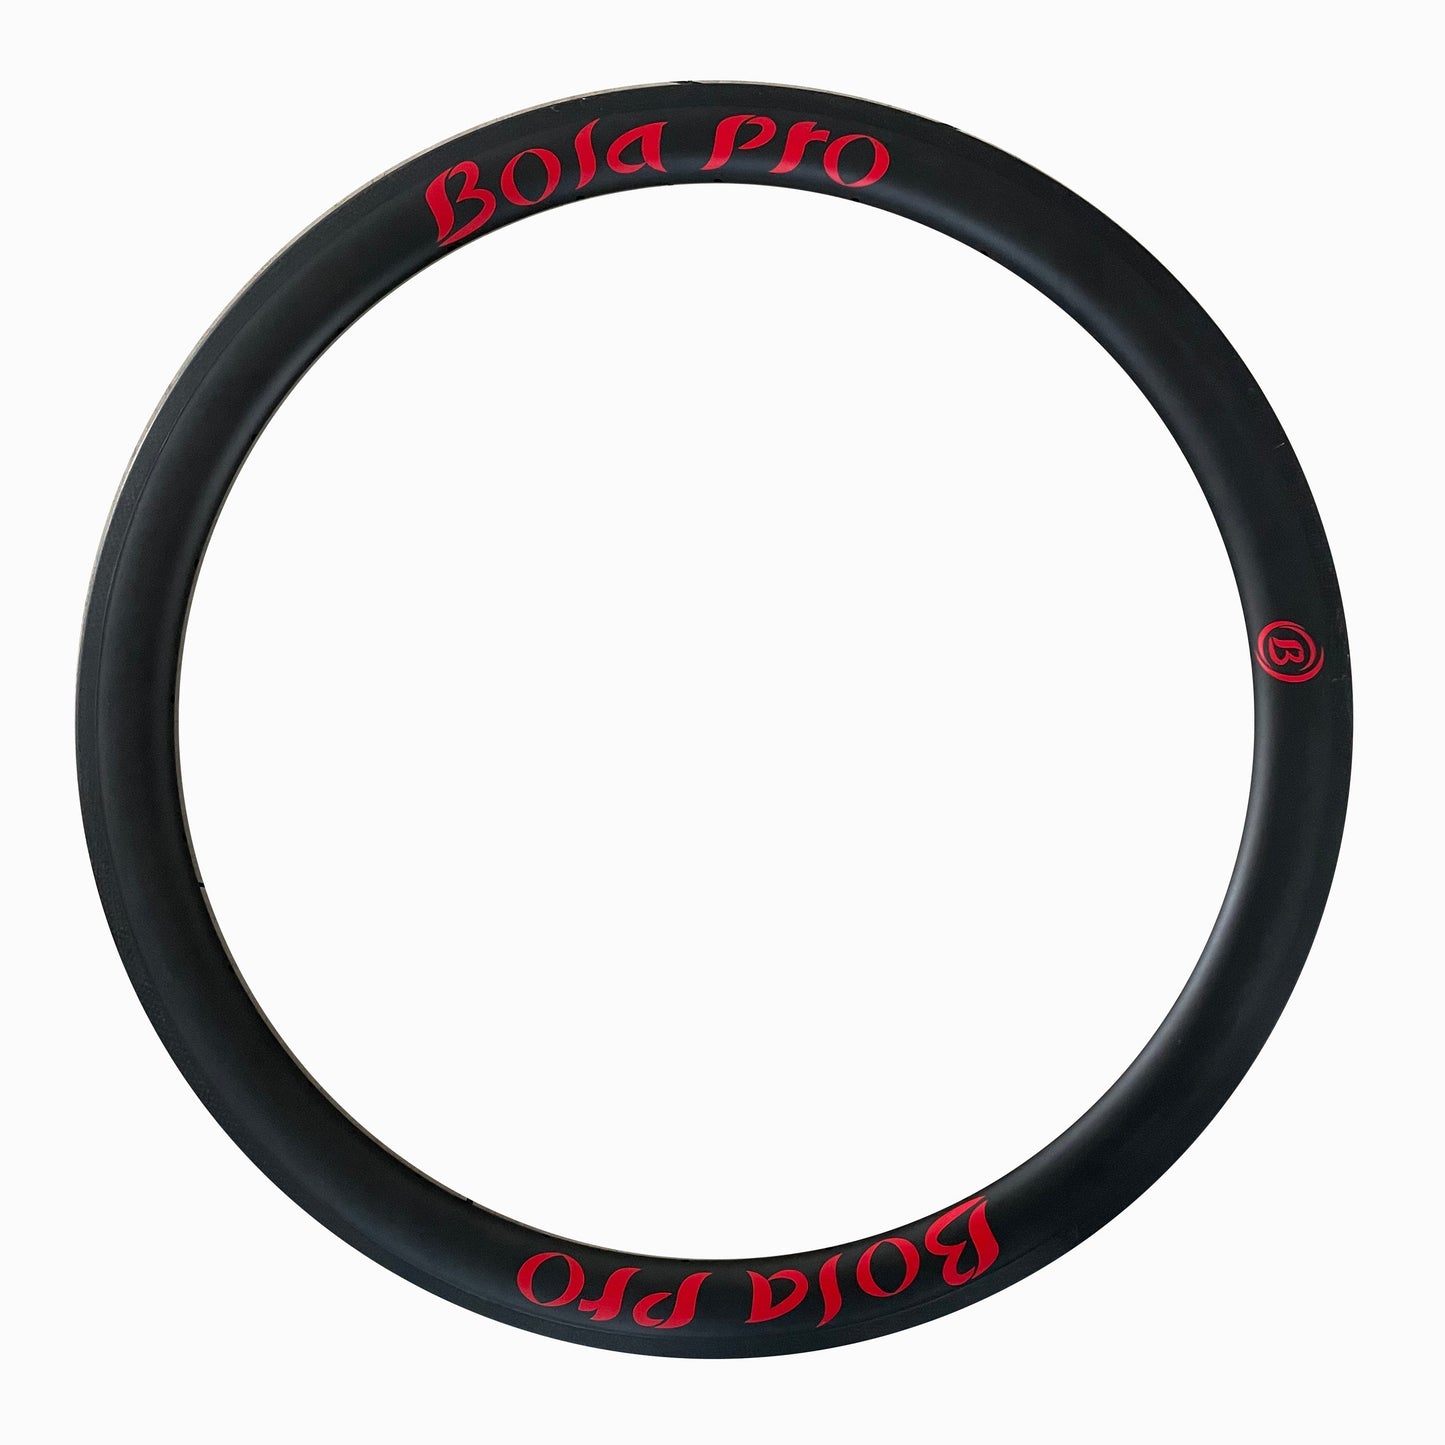 700C tubeless ready carbon race rim 35mm low profile  28mm outer wide 21mm inner wide